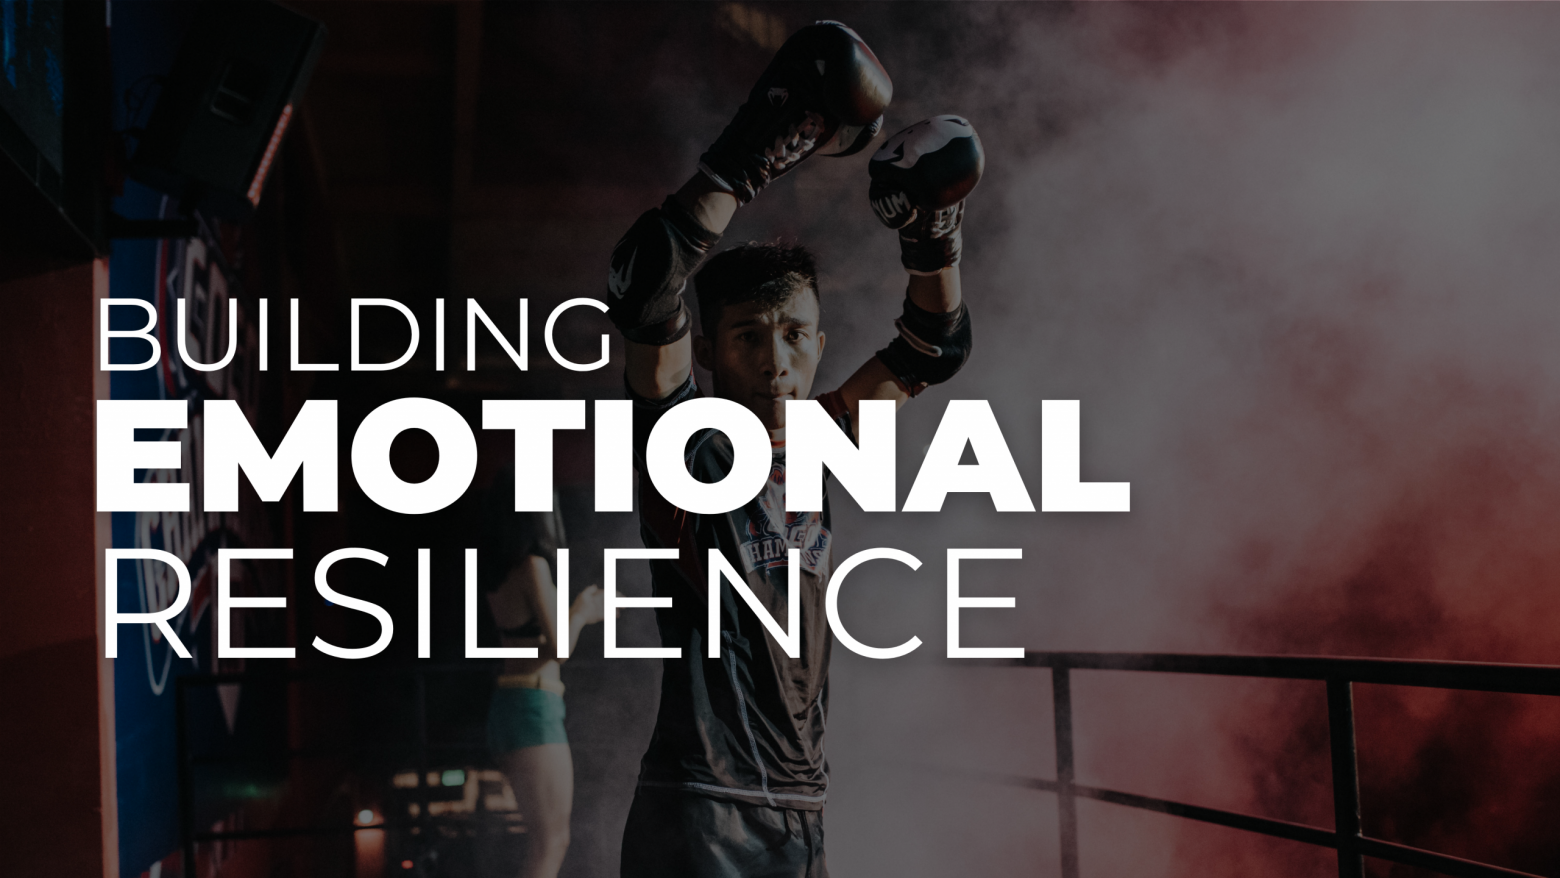 Building Emotional Resilience course for the PMP® exam